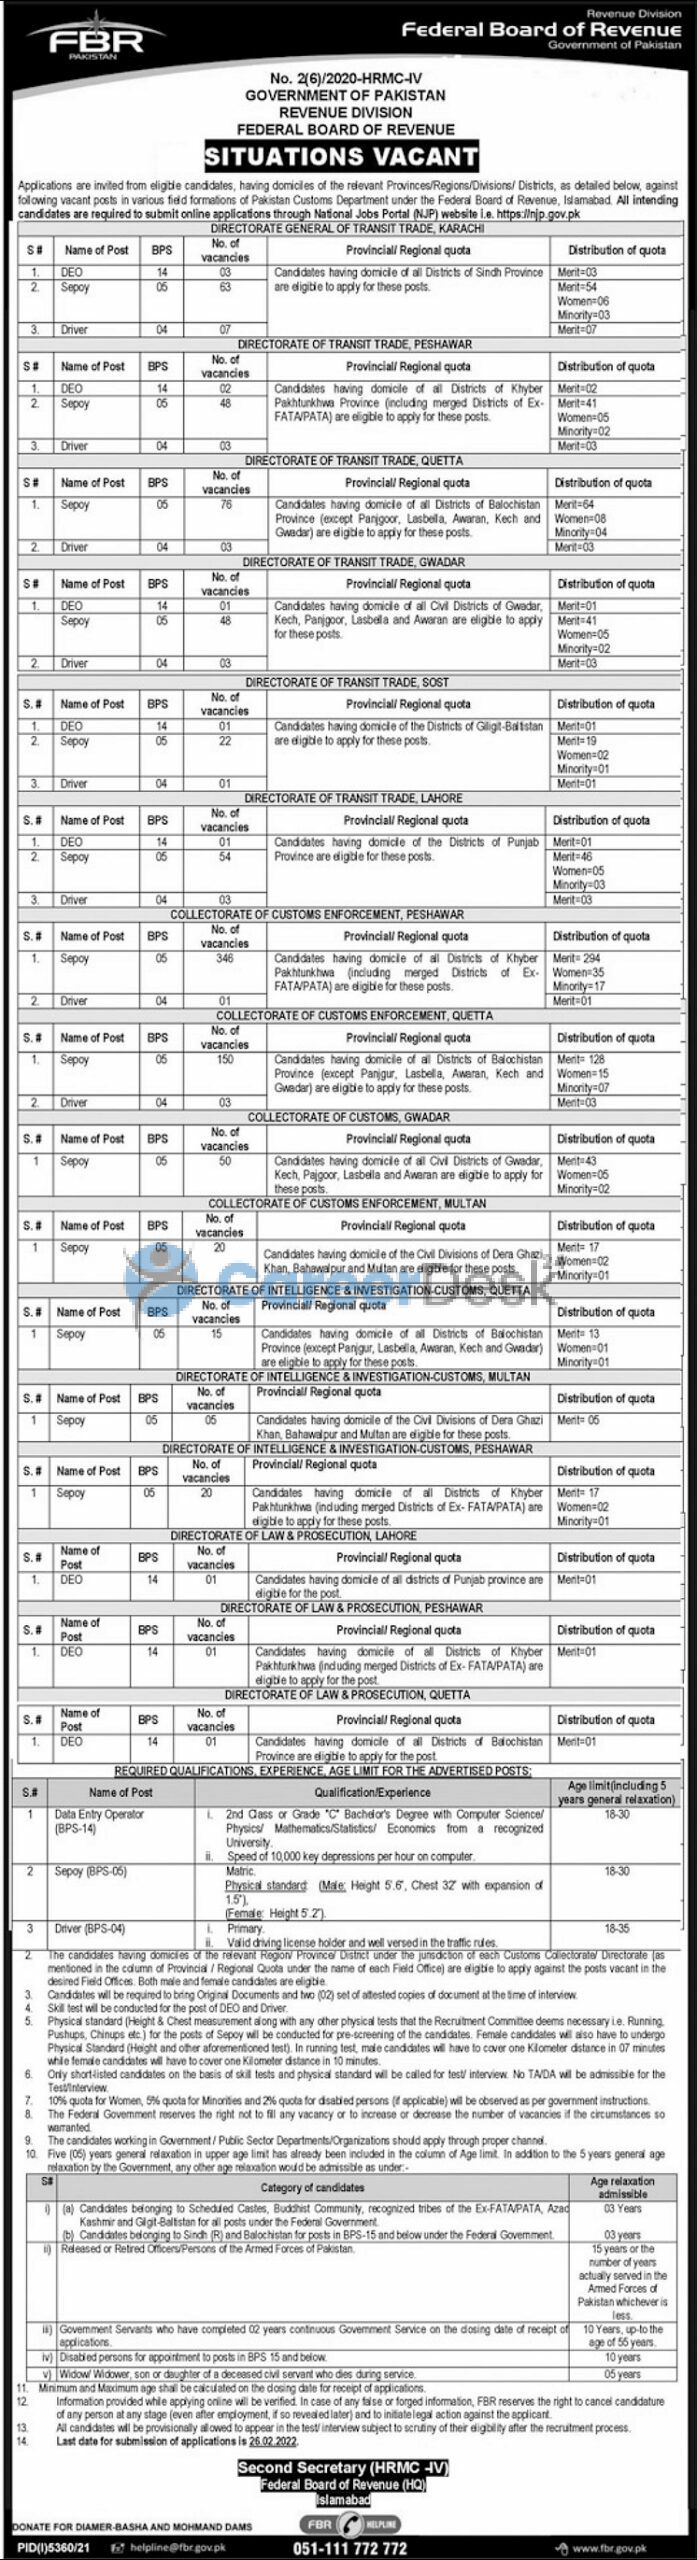 Directorate General Of Transit Trade Karachi, Peshawar, Quetta, Gwadar, Lahore and GB DEO (BPS 14) Sepoy (BPS 05) Driver (BPS 04) Domicile Karachi 03 63 07 Candidates having domicile of all districts of Sindh province Peshawar 02 48 03 Candidates having domicile of all districts of kpk province Quetta 00 75 03 Candidates having domicile of all districts of Balochistan province Gwadar 01 48 03 Candidates having domicile of Gwadar and relavt district SOST (GB) 01 22 01 Candidates having domicile of all districts of Gilgit Baltistan Lahore 01 54 03 Candidates having domicile of all districts of Punjab province Collectorate of custom enforcement Peshawar, Quetta, Gwadar and Multan DEO (BPS 14) Sepoy (BPS 05) Driver (BPS 04) Domicile Peshawar – 346 01 Candidates having domicile of all districts of kpk province Quetta – 150 03 Candidates having domicile of all districts of Balochistan province Gwadar – 50 – Candidates having domicile of Gwadar and relavt district Multan – 20 – DG kHAN Bahawalpur and Multan Directorate of Intelligence & Investigation custom Quetta Multan and Peshawar DEO (BPS 14) Sepoy (BPS 05) Driver (BPS 04) Domicile Quetta – 15 – Candidates having domicile of all districts of Balochistan province Multan – 05 – DG kHAN Bahawalpur and Multan Peshawar – 20 – Candidates having domicile of all districts of kpk province Directorate of Law and Prosecution Lahore, Peshawar and Quetta DEO (BPS 14) Sepoy (BPS 05) Driver (BPS 04) Domicile Lahore 01 – – Candidates having domicile of all districts of Punjab province Peshawar 01 – – Candidates having domicile of all districts of kpk province Quetta 01 – – Candidates having domicile of all districts of Balochistan province